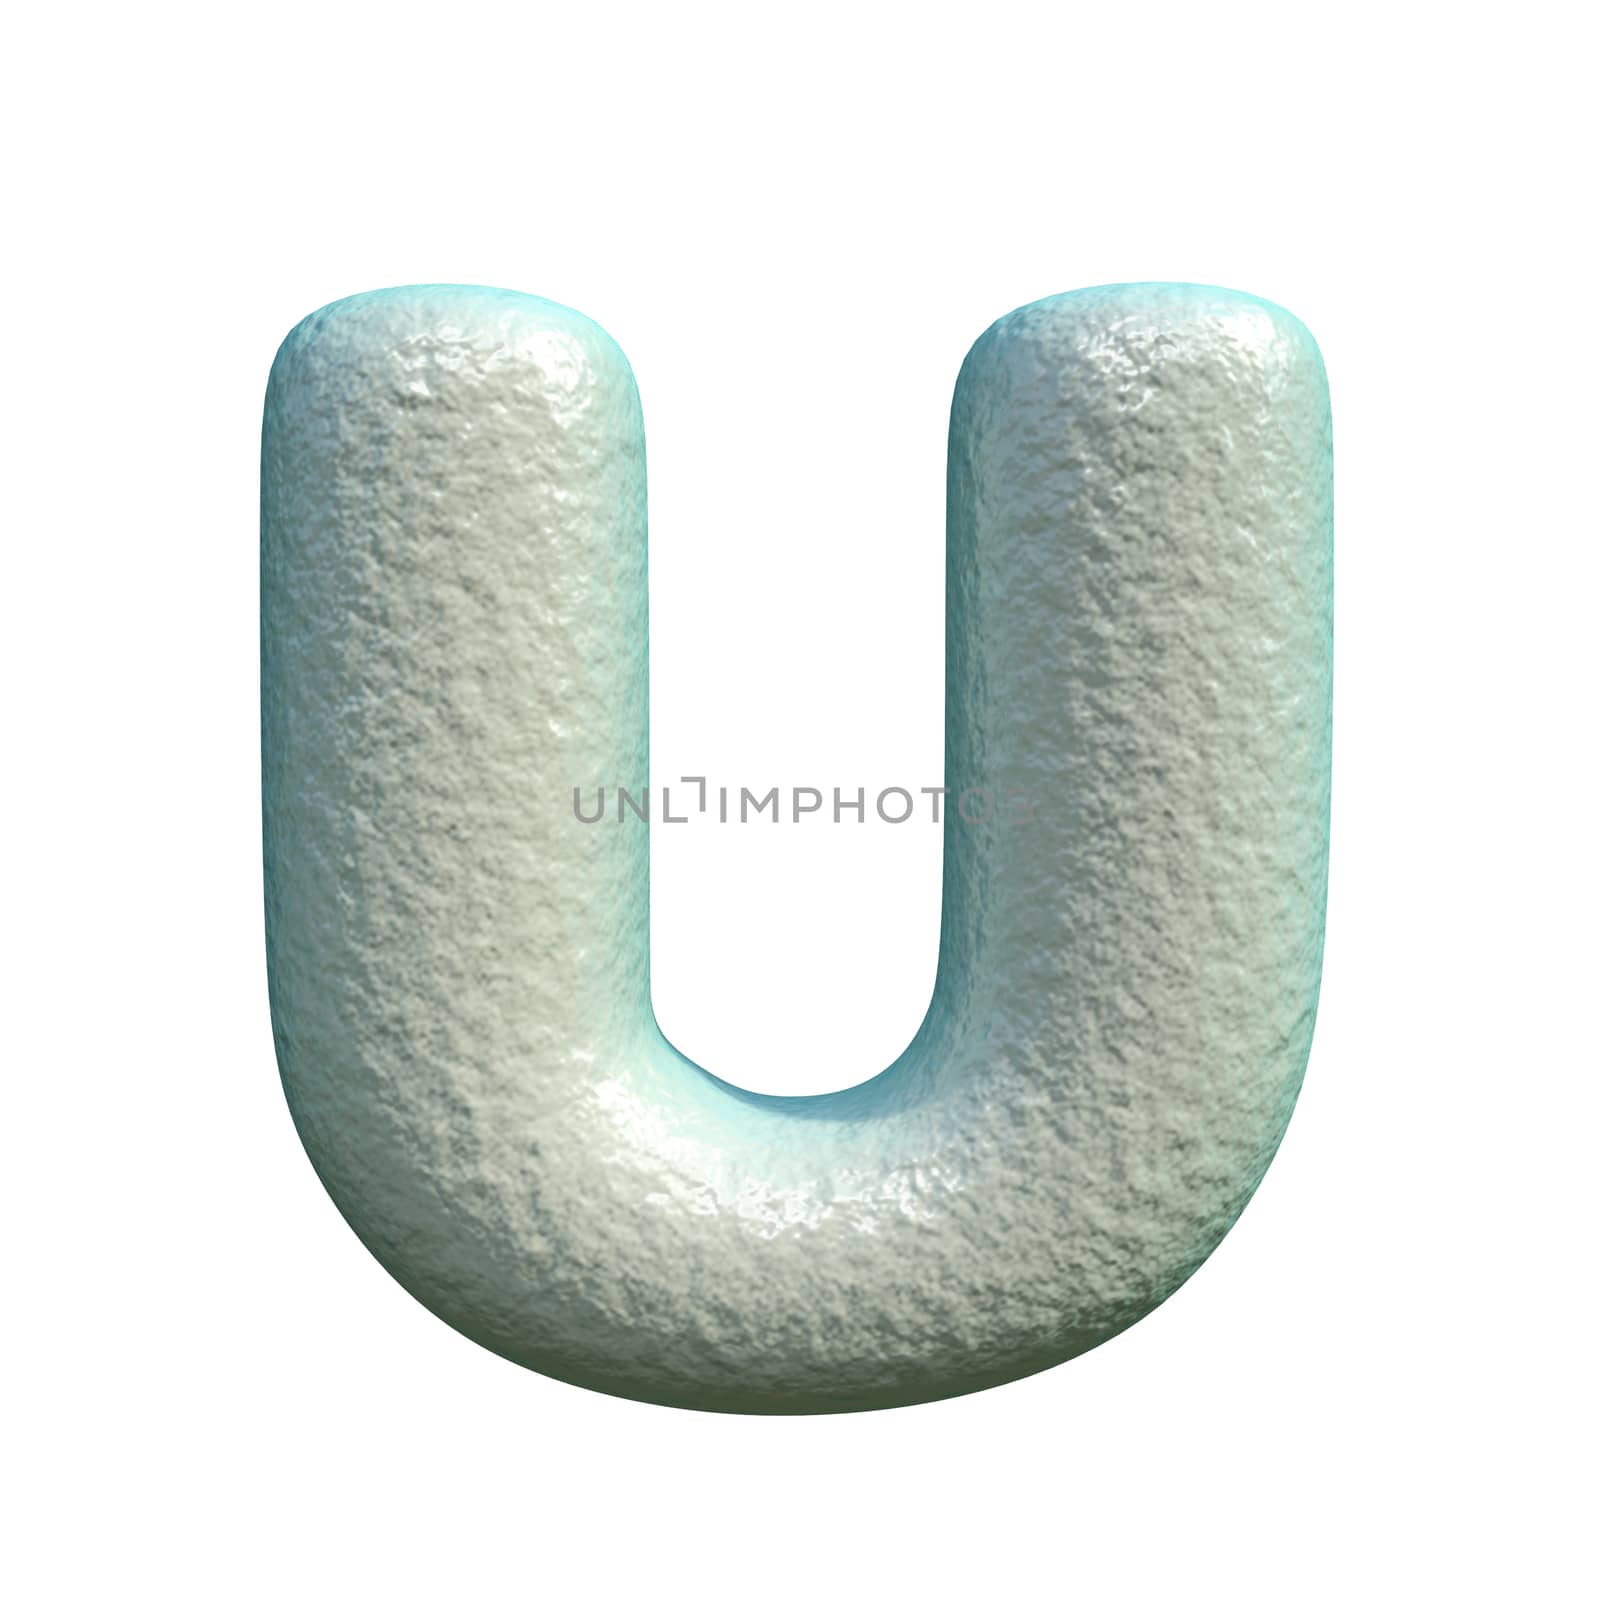 Grey blue clay font Letter U 3D rendering illustration isolated on white background